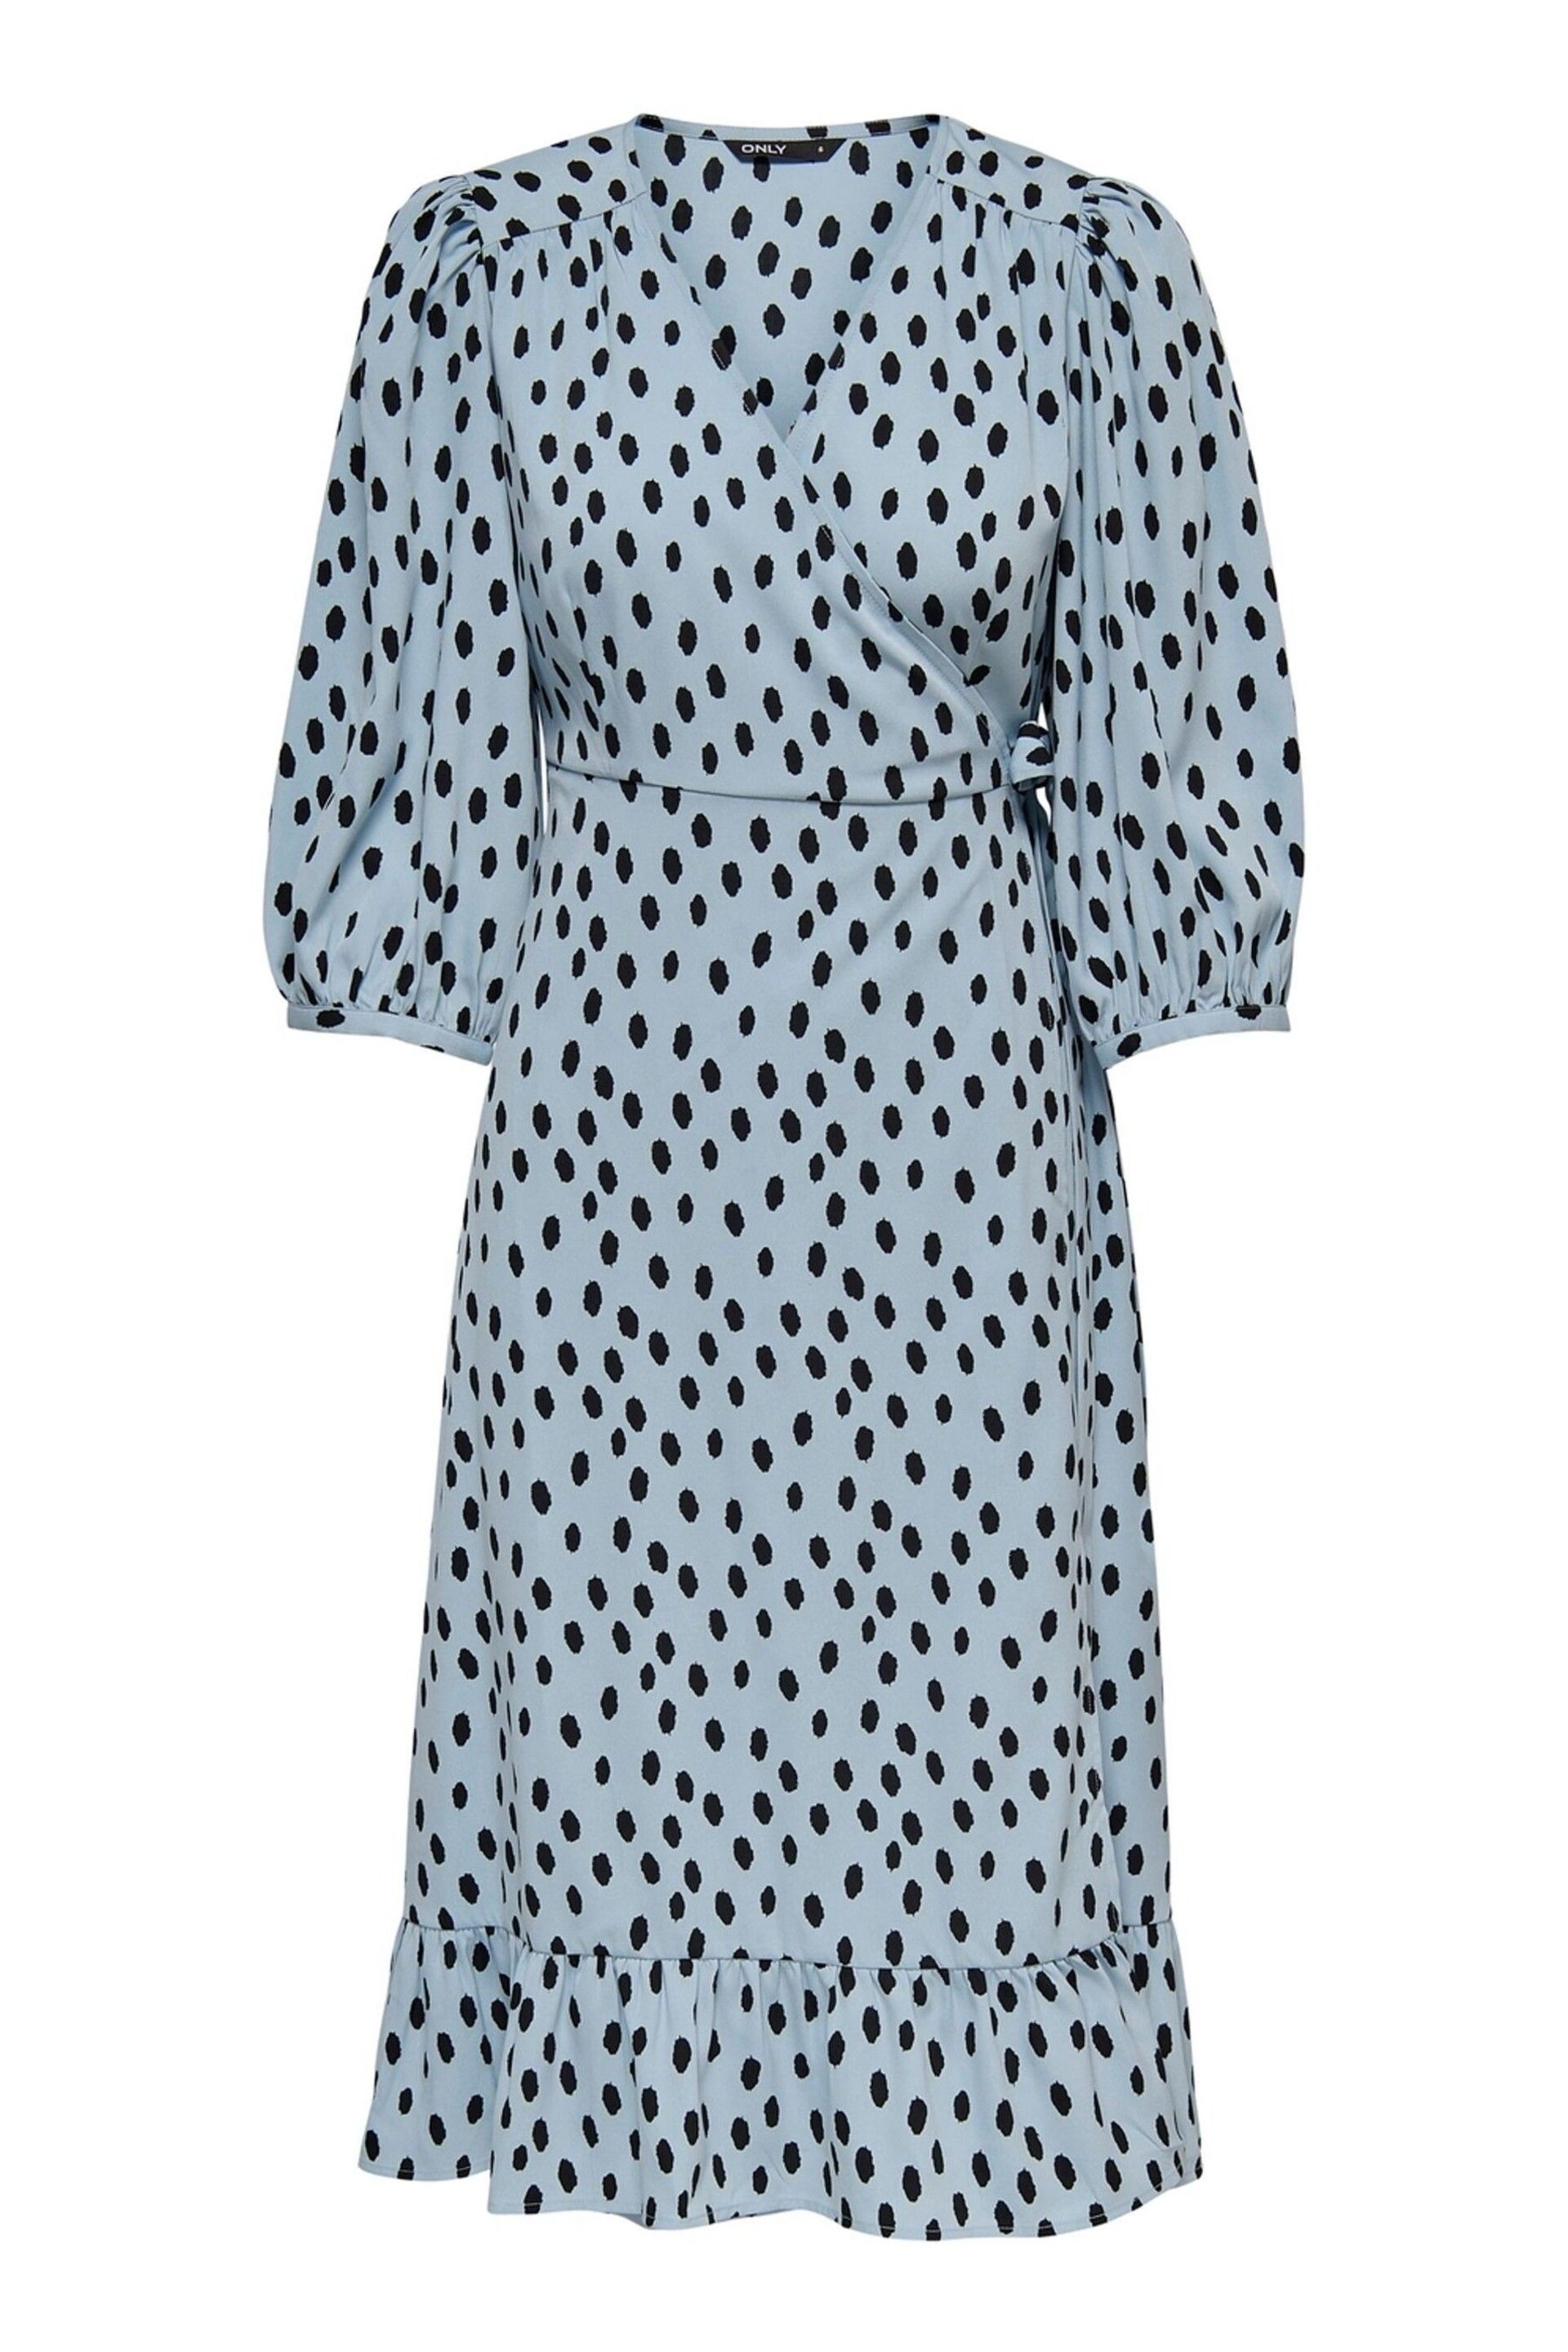 ONLY Blue Long Sleeve Wrap Midi Dress - Image 6 of 7